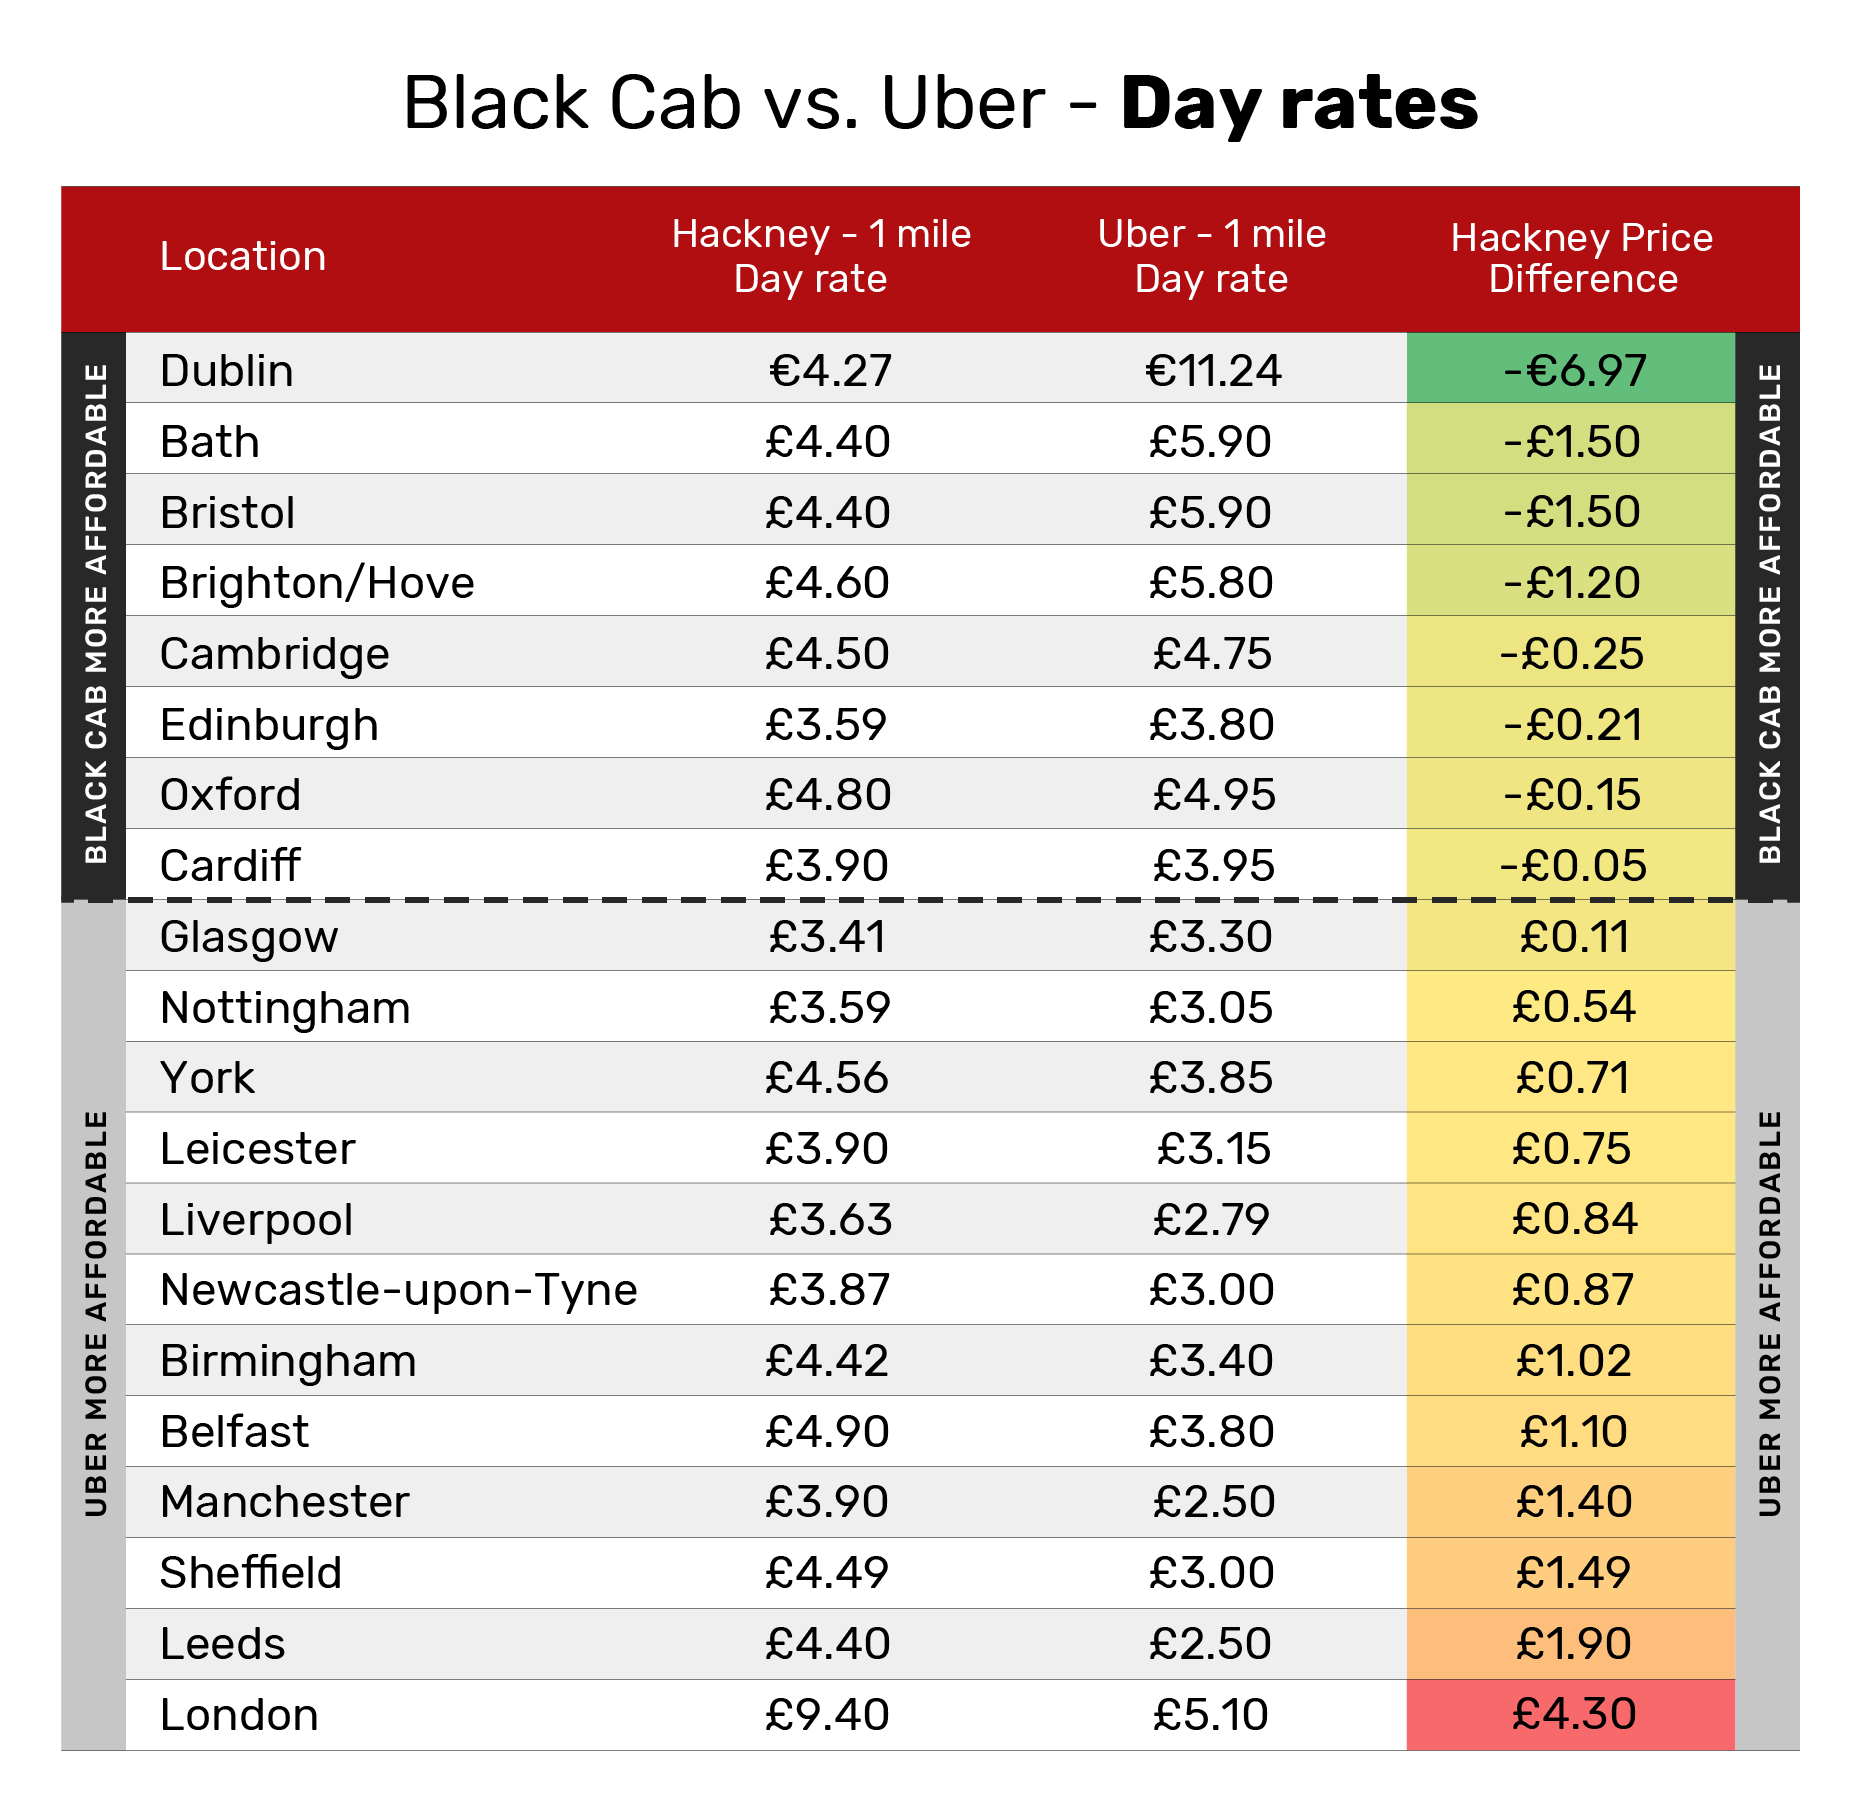 Black Cab Vs Ubery Taxi Fares - Day Rates